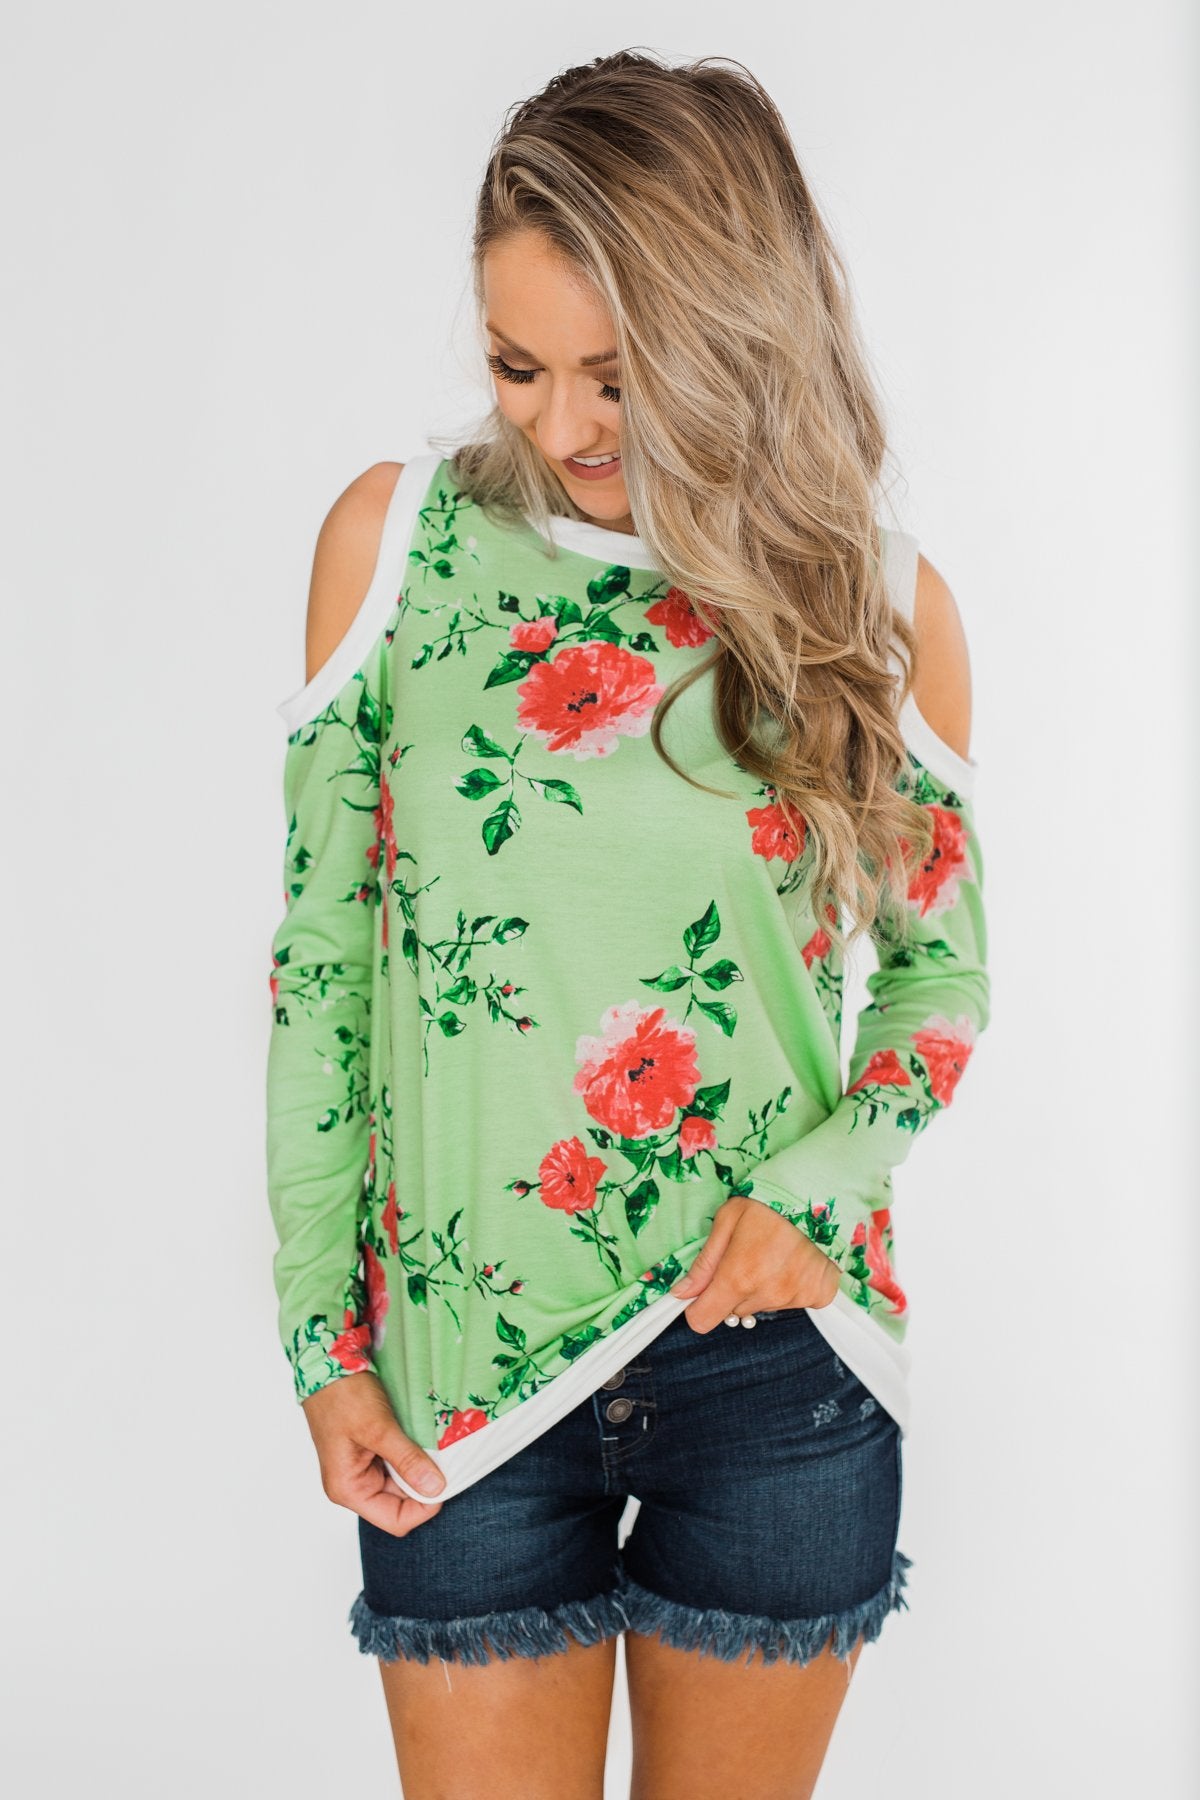 Made to Stand Out Floral Cold Shoulder Top- Shamrock Green